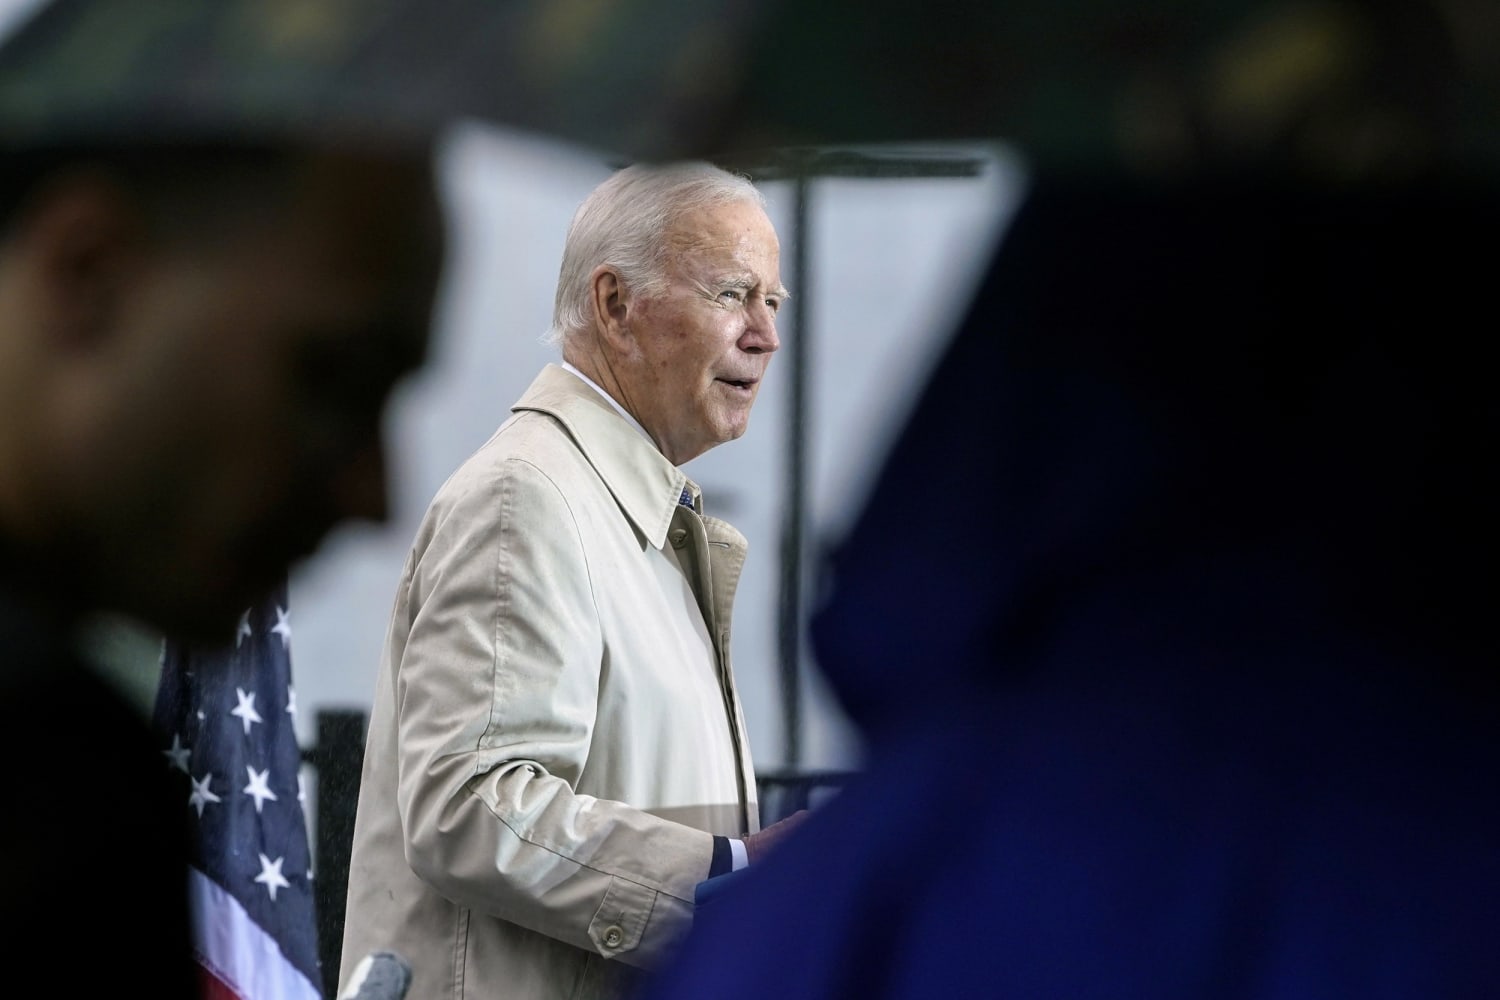 Biden honors 9/11 victims, vows commitment to thwart terrorism